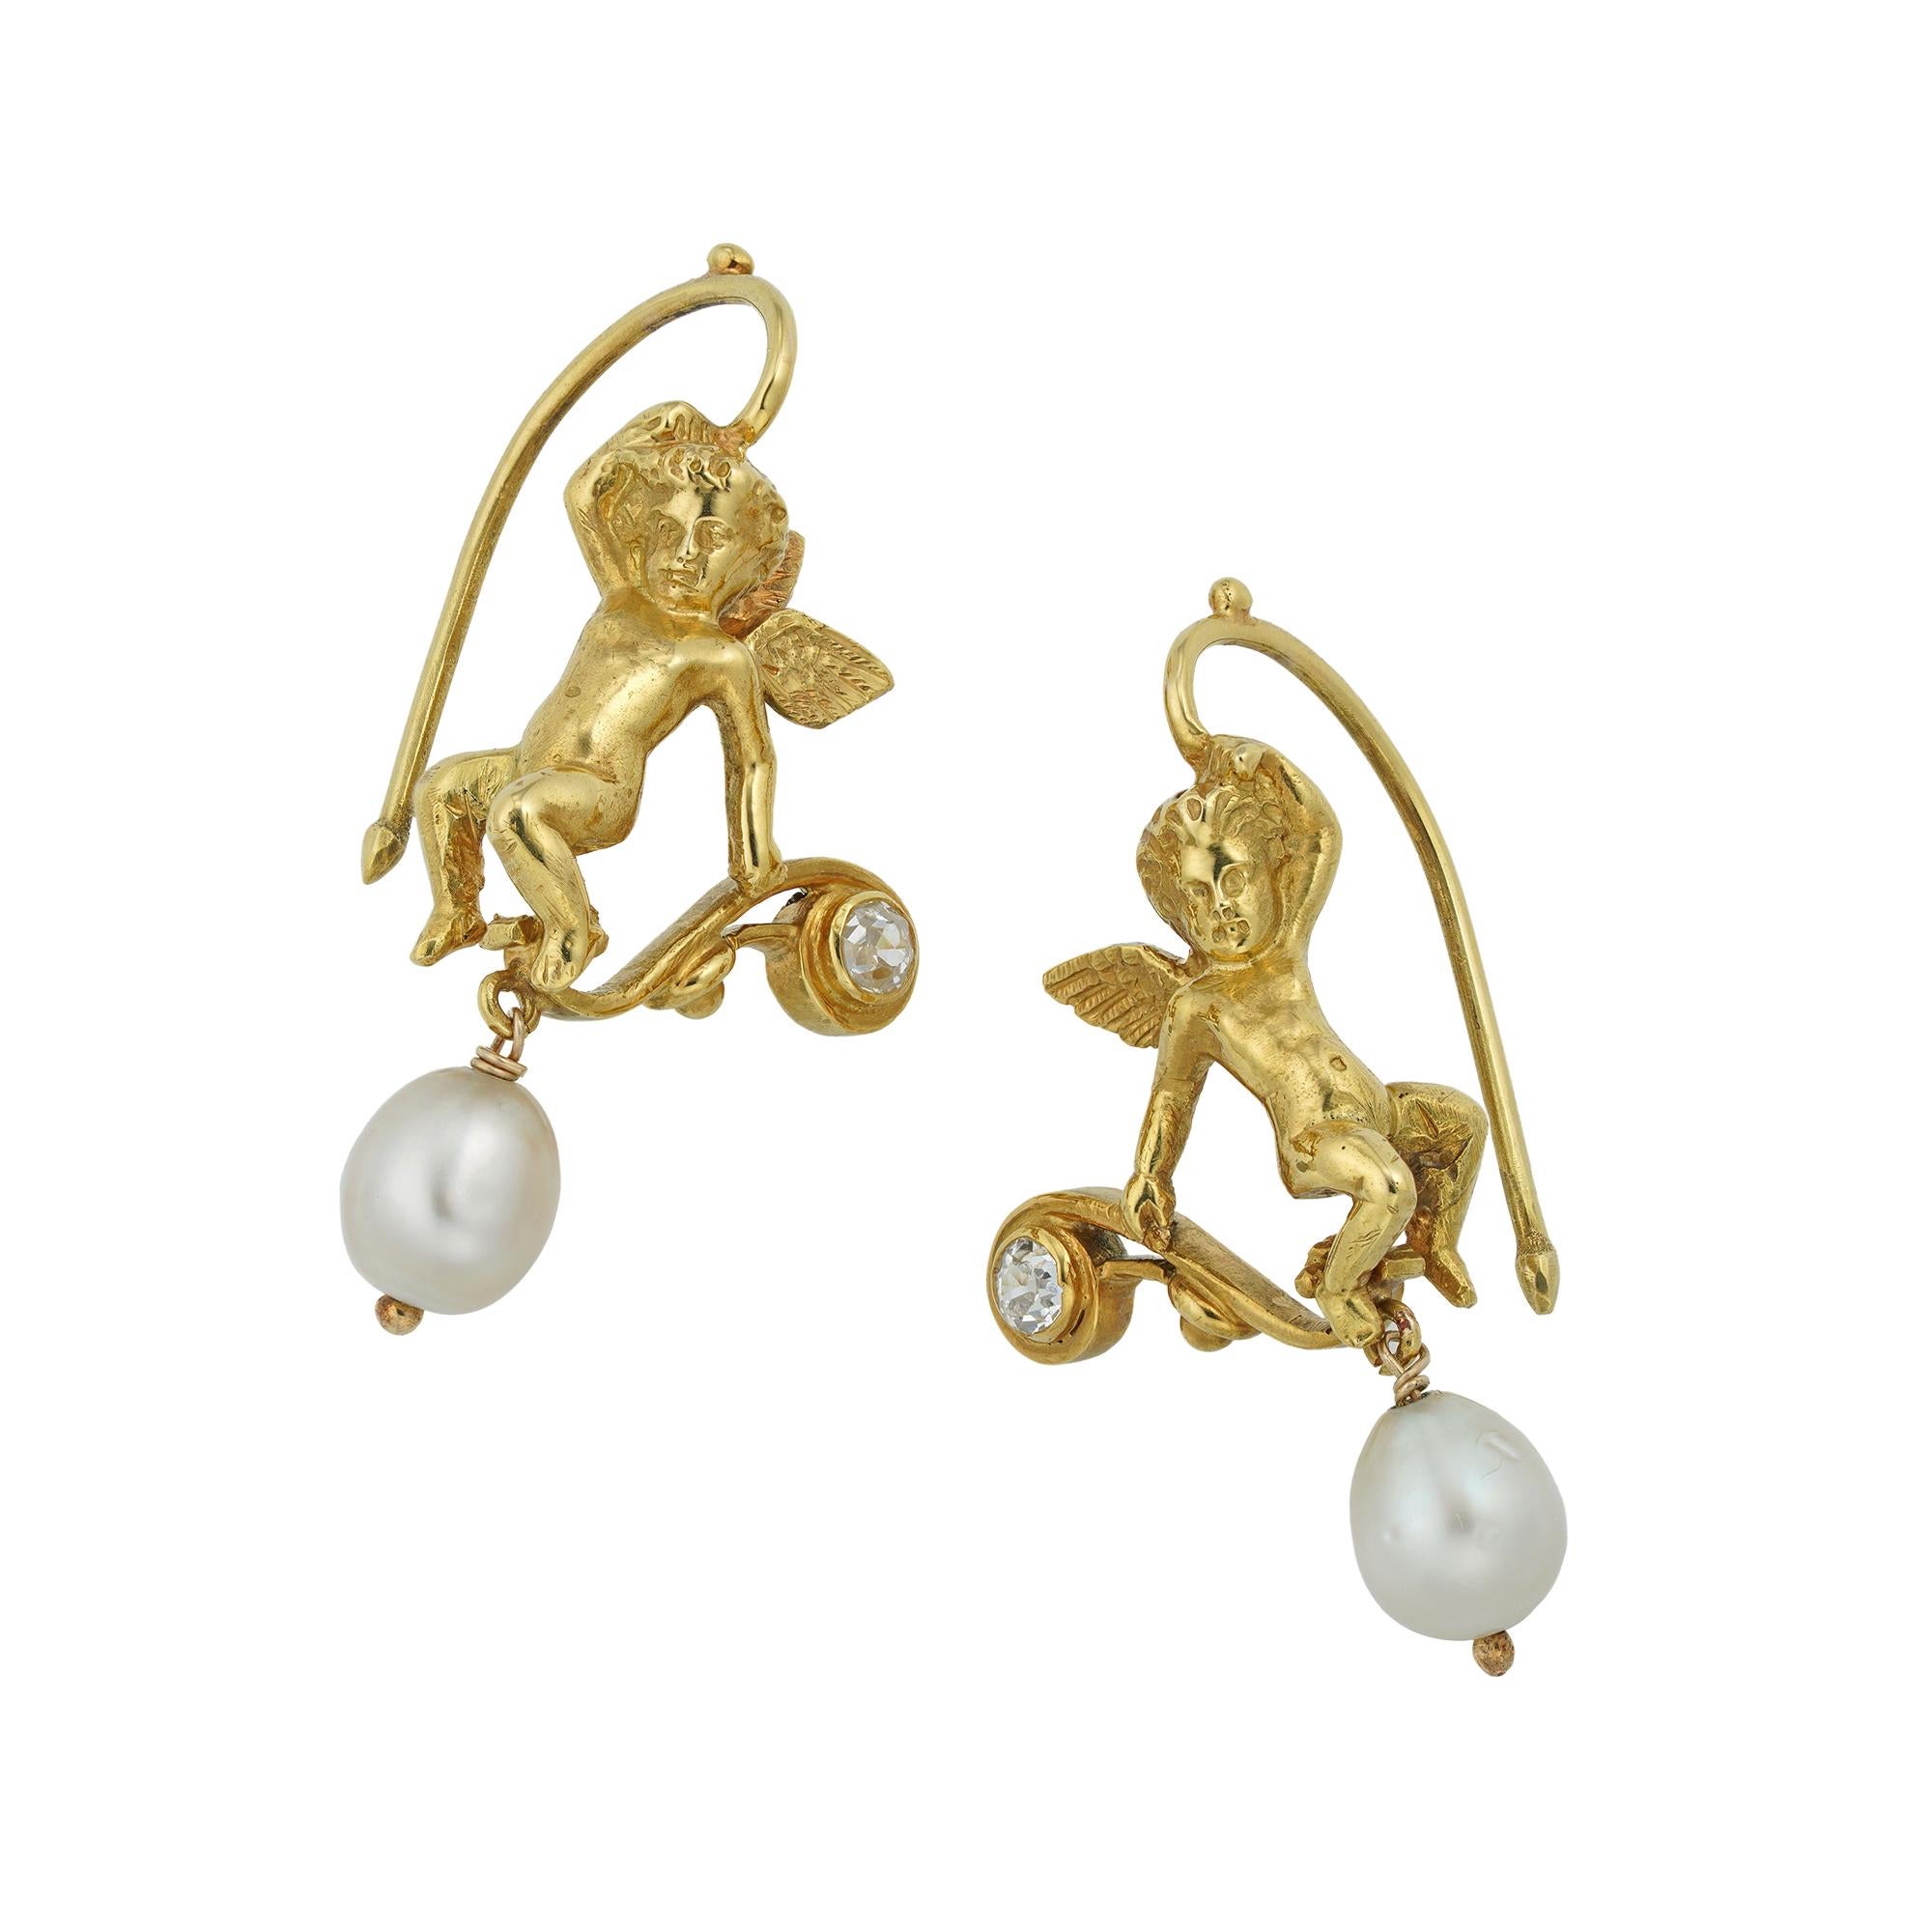 A late Victorian pair of natural pearl and diamond earrings, each earring with Eros, on the one hand holding a bow, the bow set with an old-cut diamond on the one finial and suspending a natural pearl drop on the other, on the other hand is holding